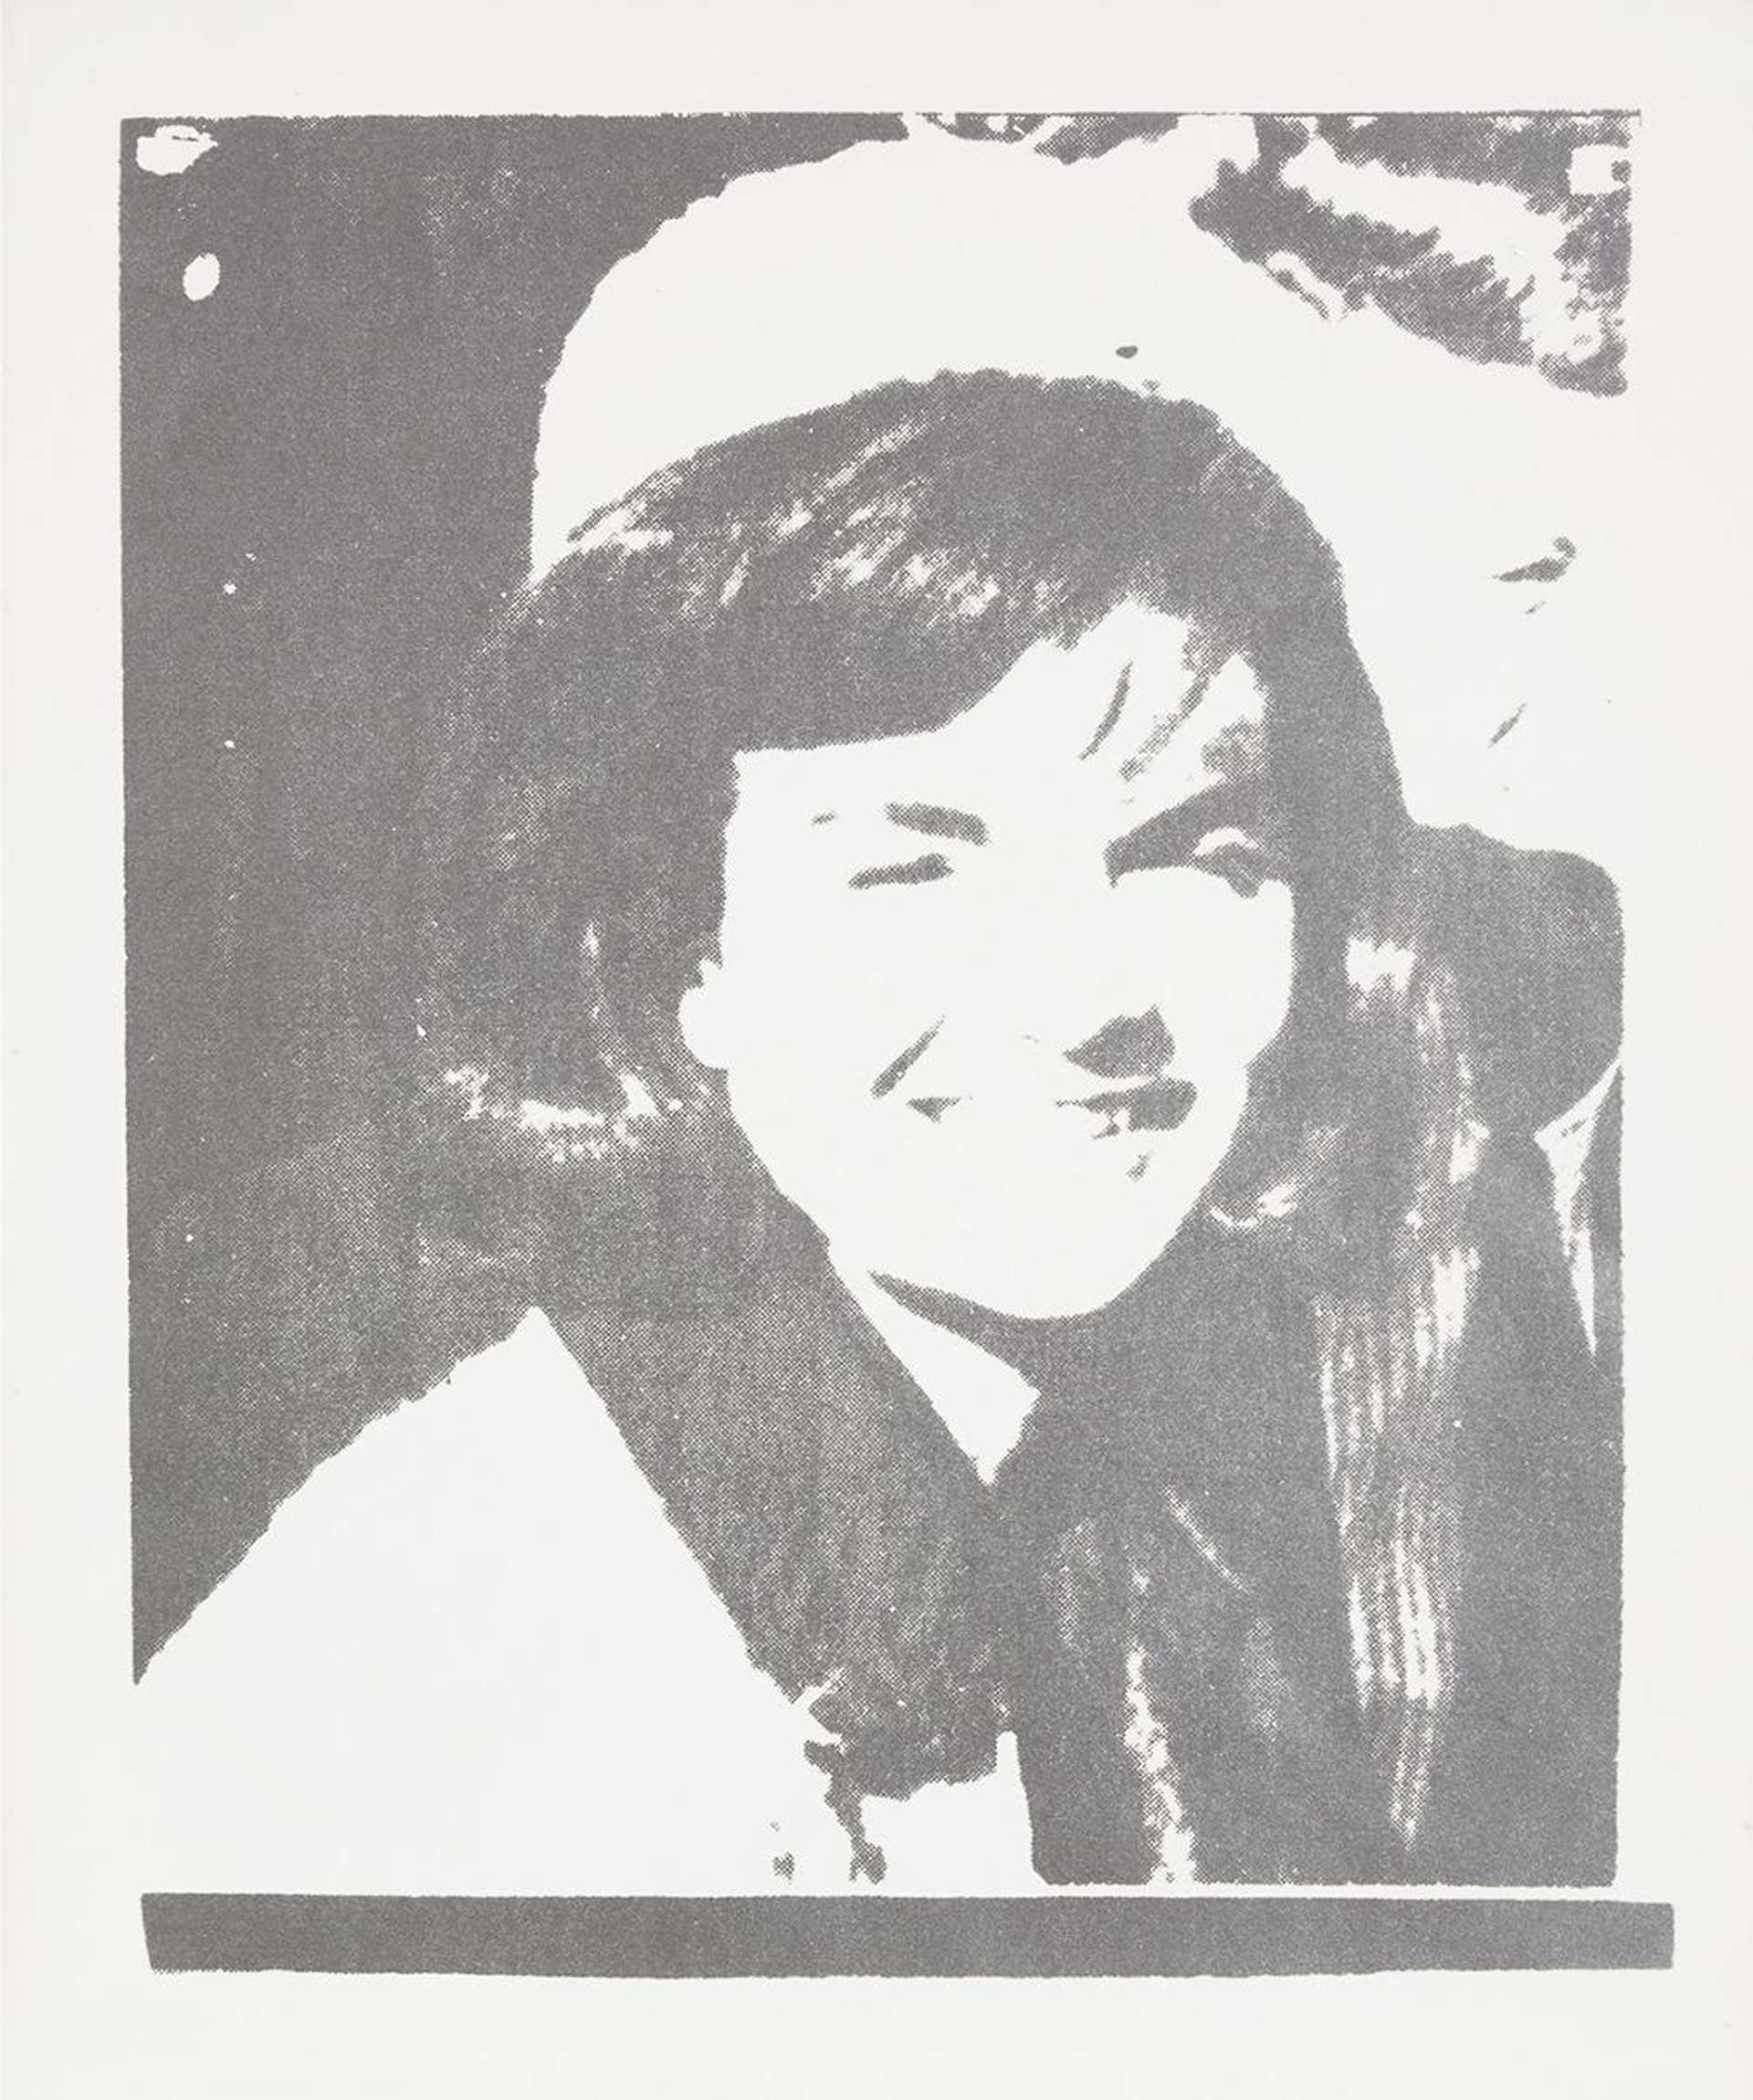 A screenprint by Andy Warhol depicting Jacqueline Kennedy in a pale suite and hat in black and white.